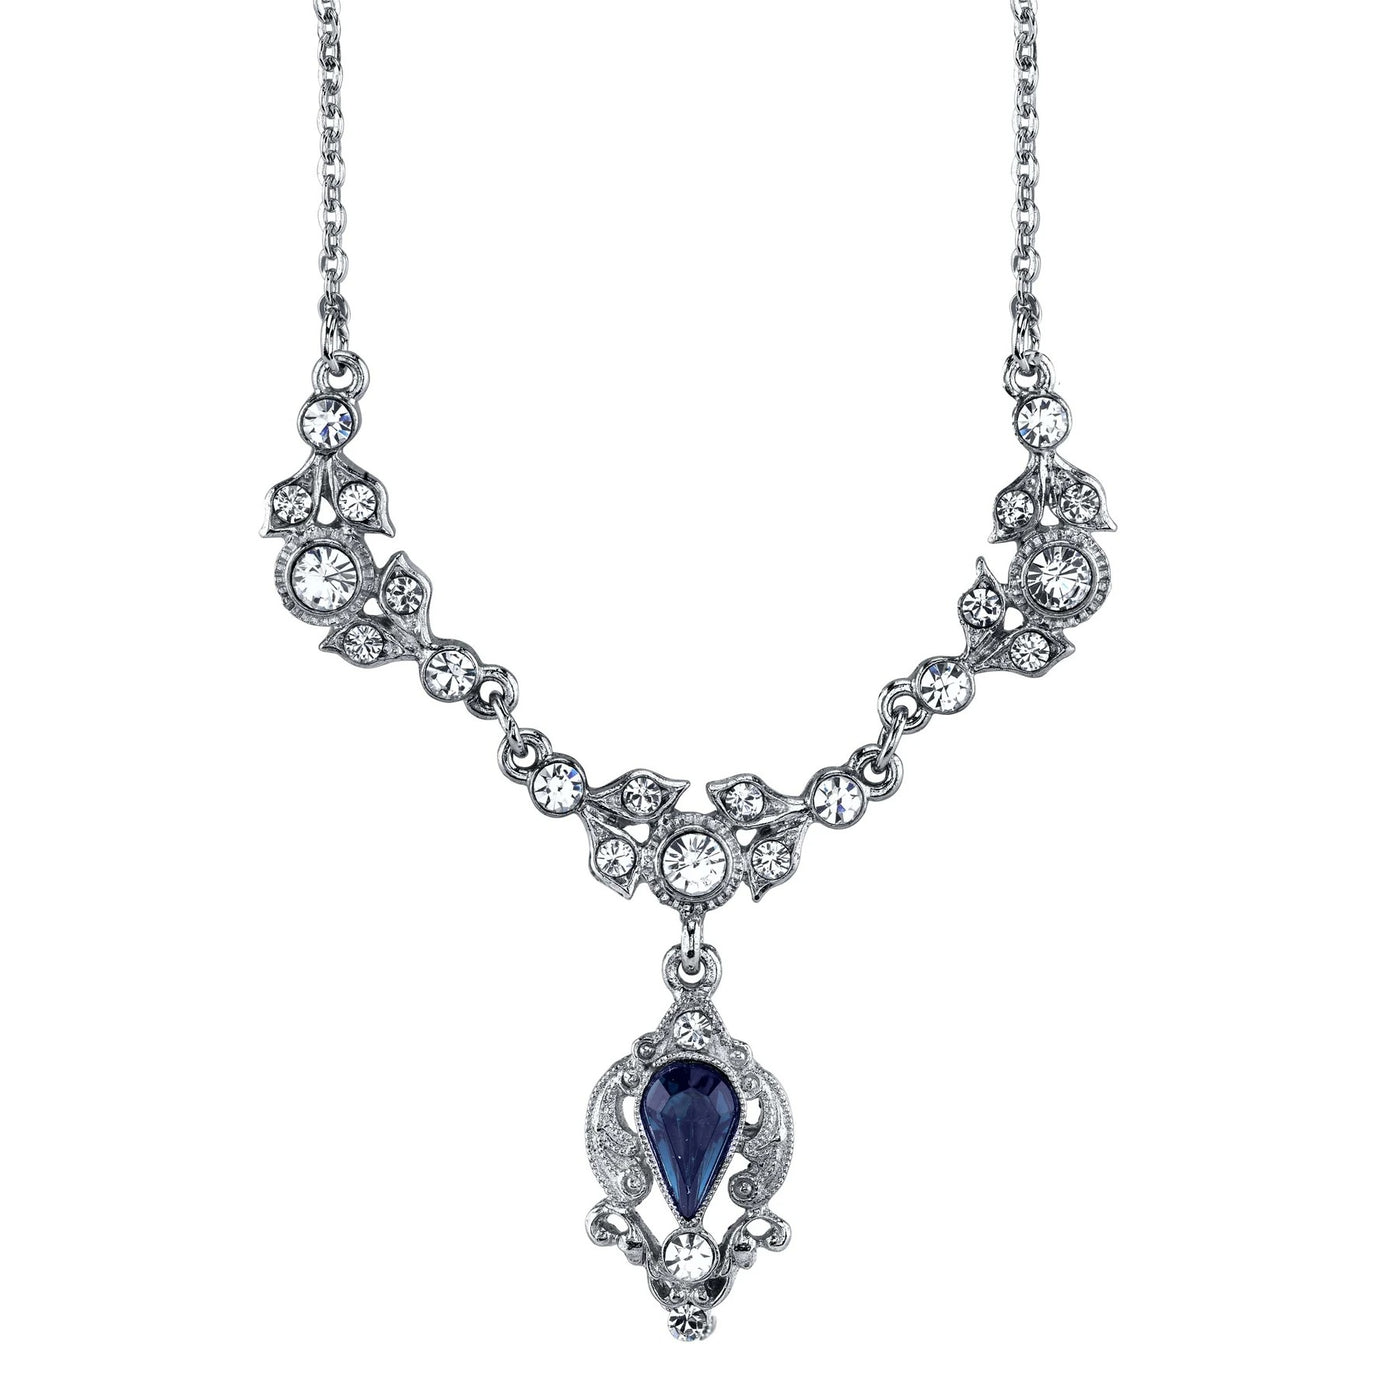 Bridgerton Inspired Crystal Drop Necklace by 1928 Jewelry